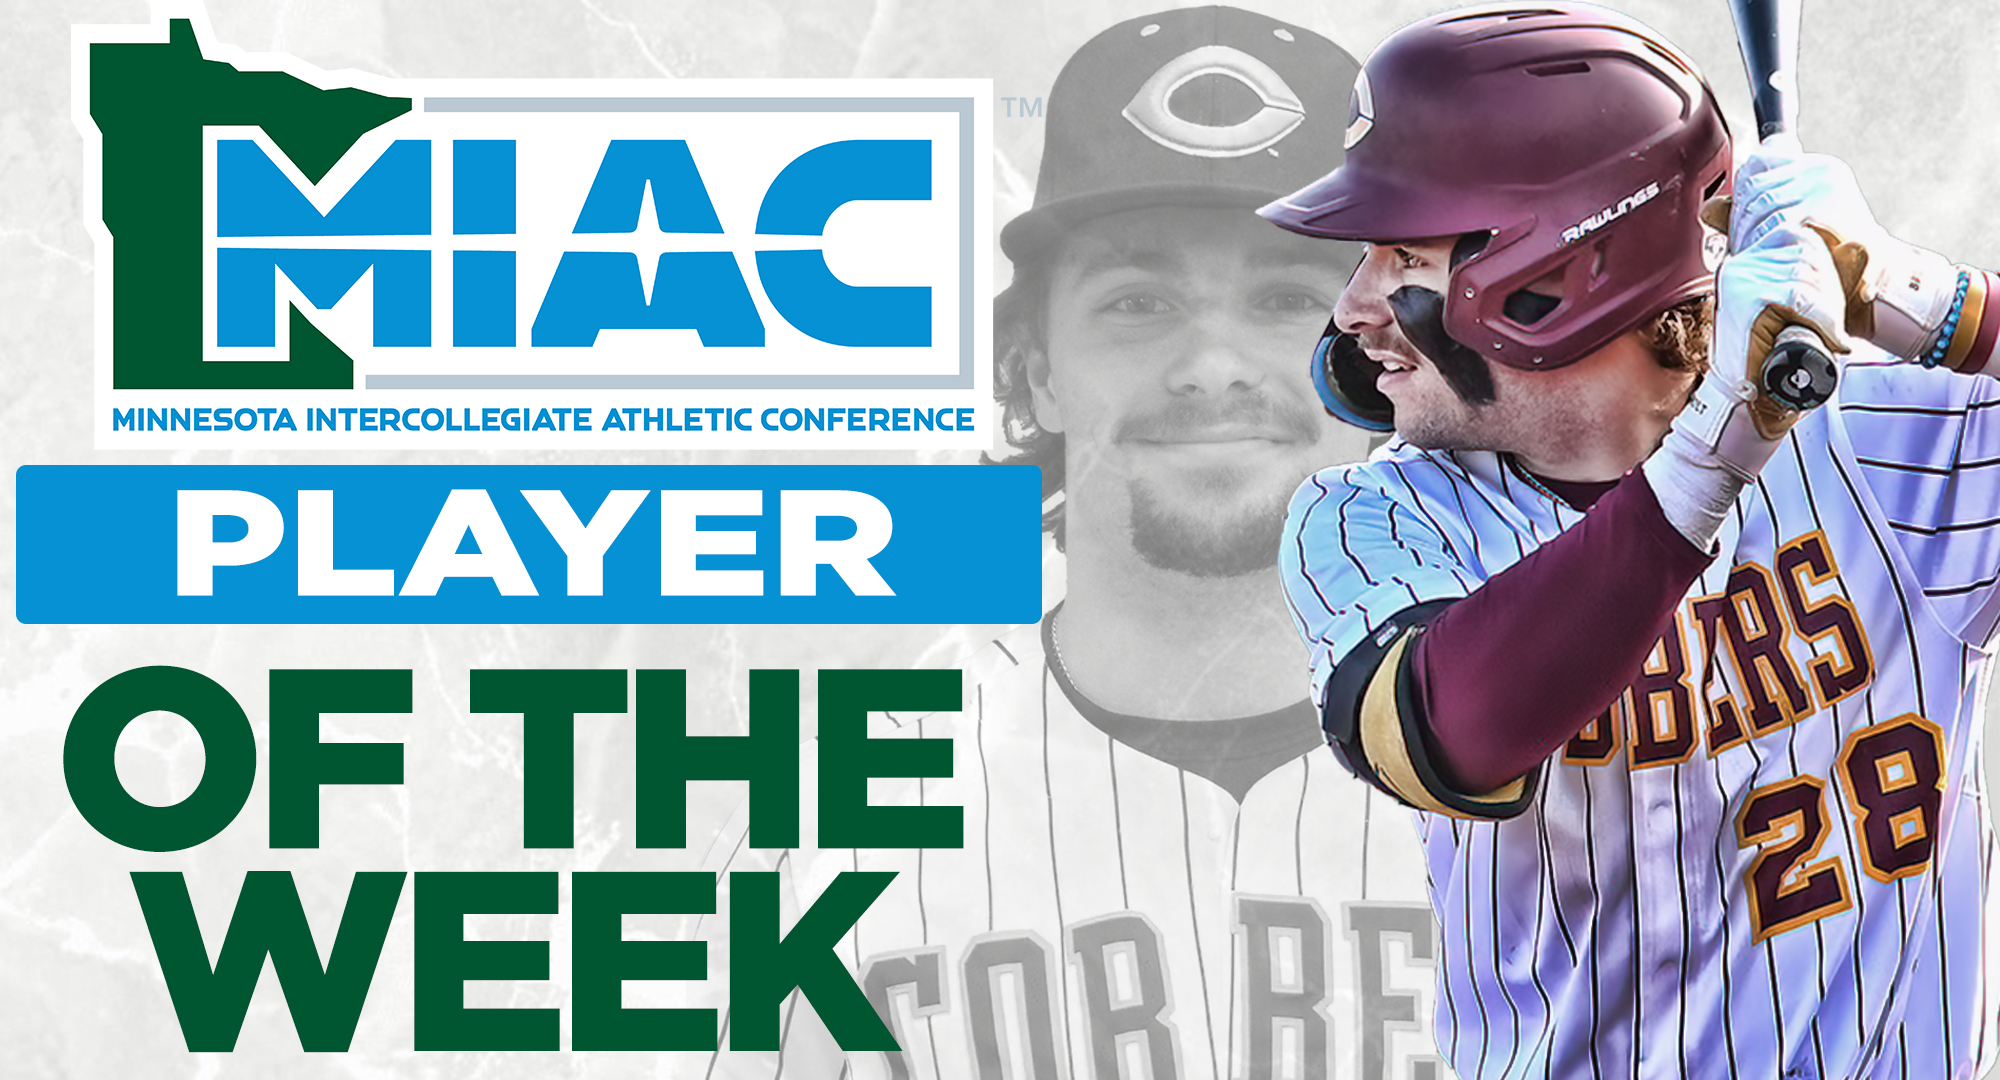 David Dorsey was named the MIAC Player of the Week for his 3 home run, eight RBI performance last week. He hit .461 in the three games.